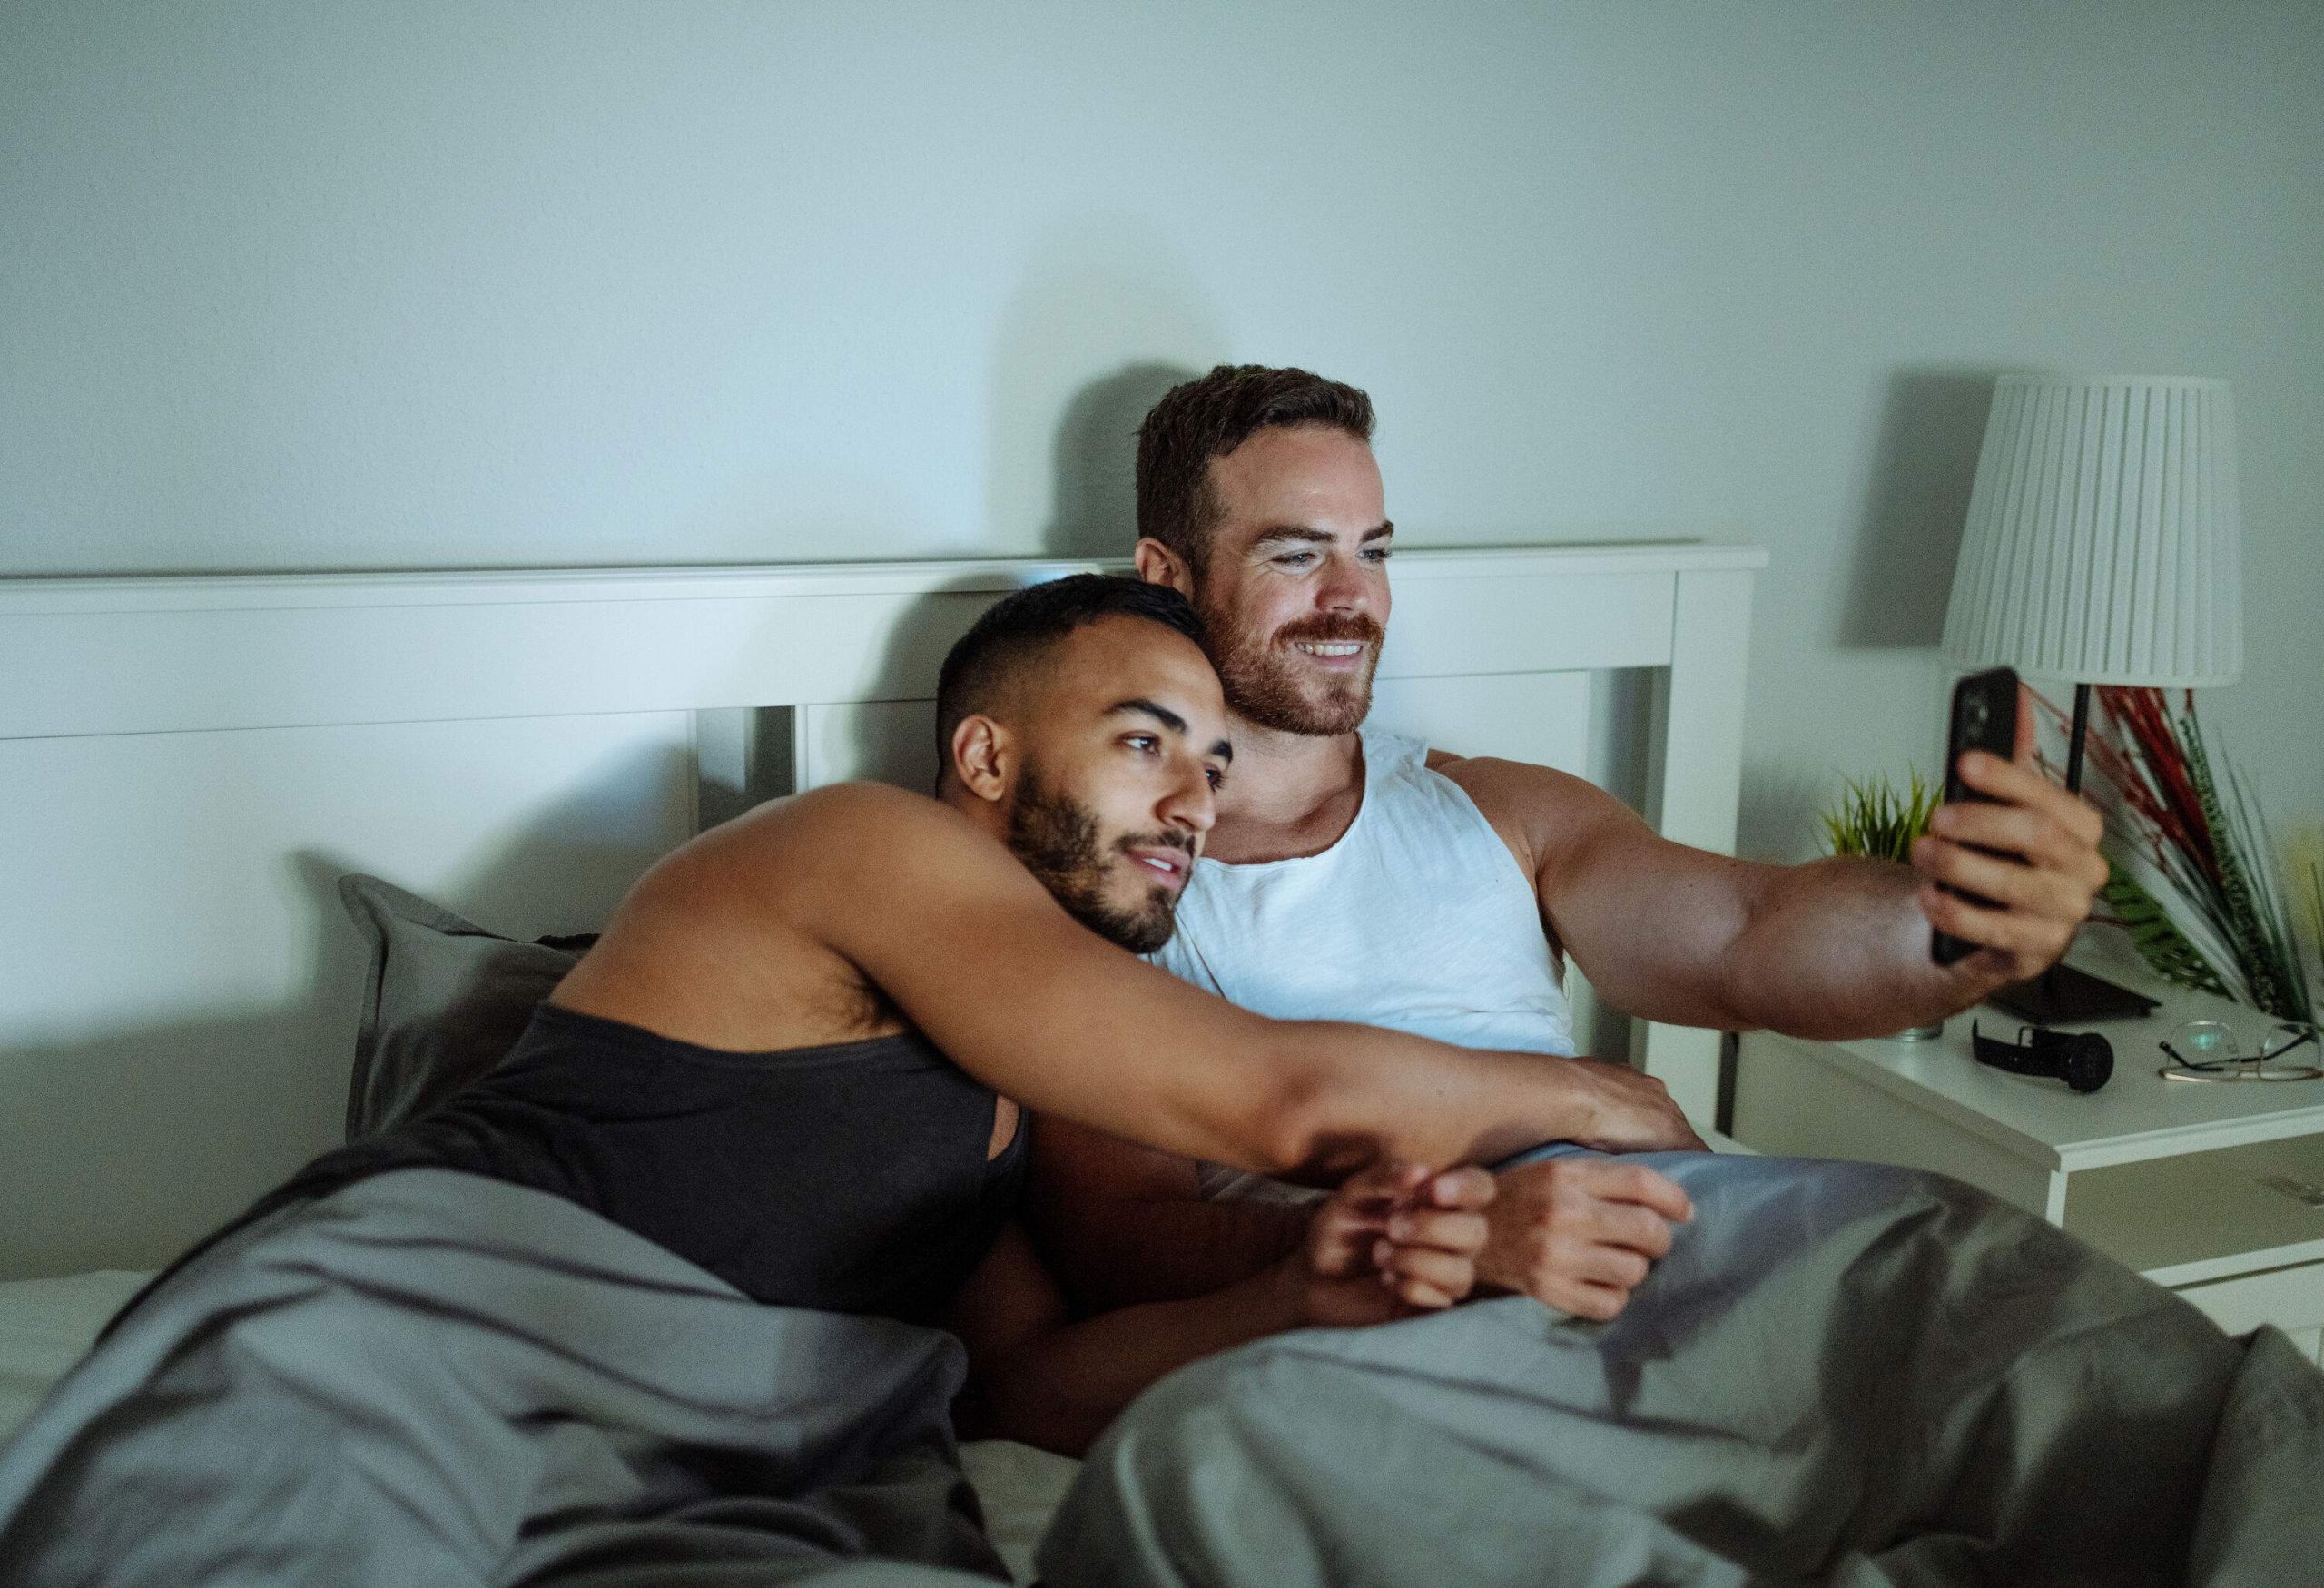 A sweet gay couple lying in bed and looking at a smart device.